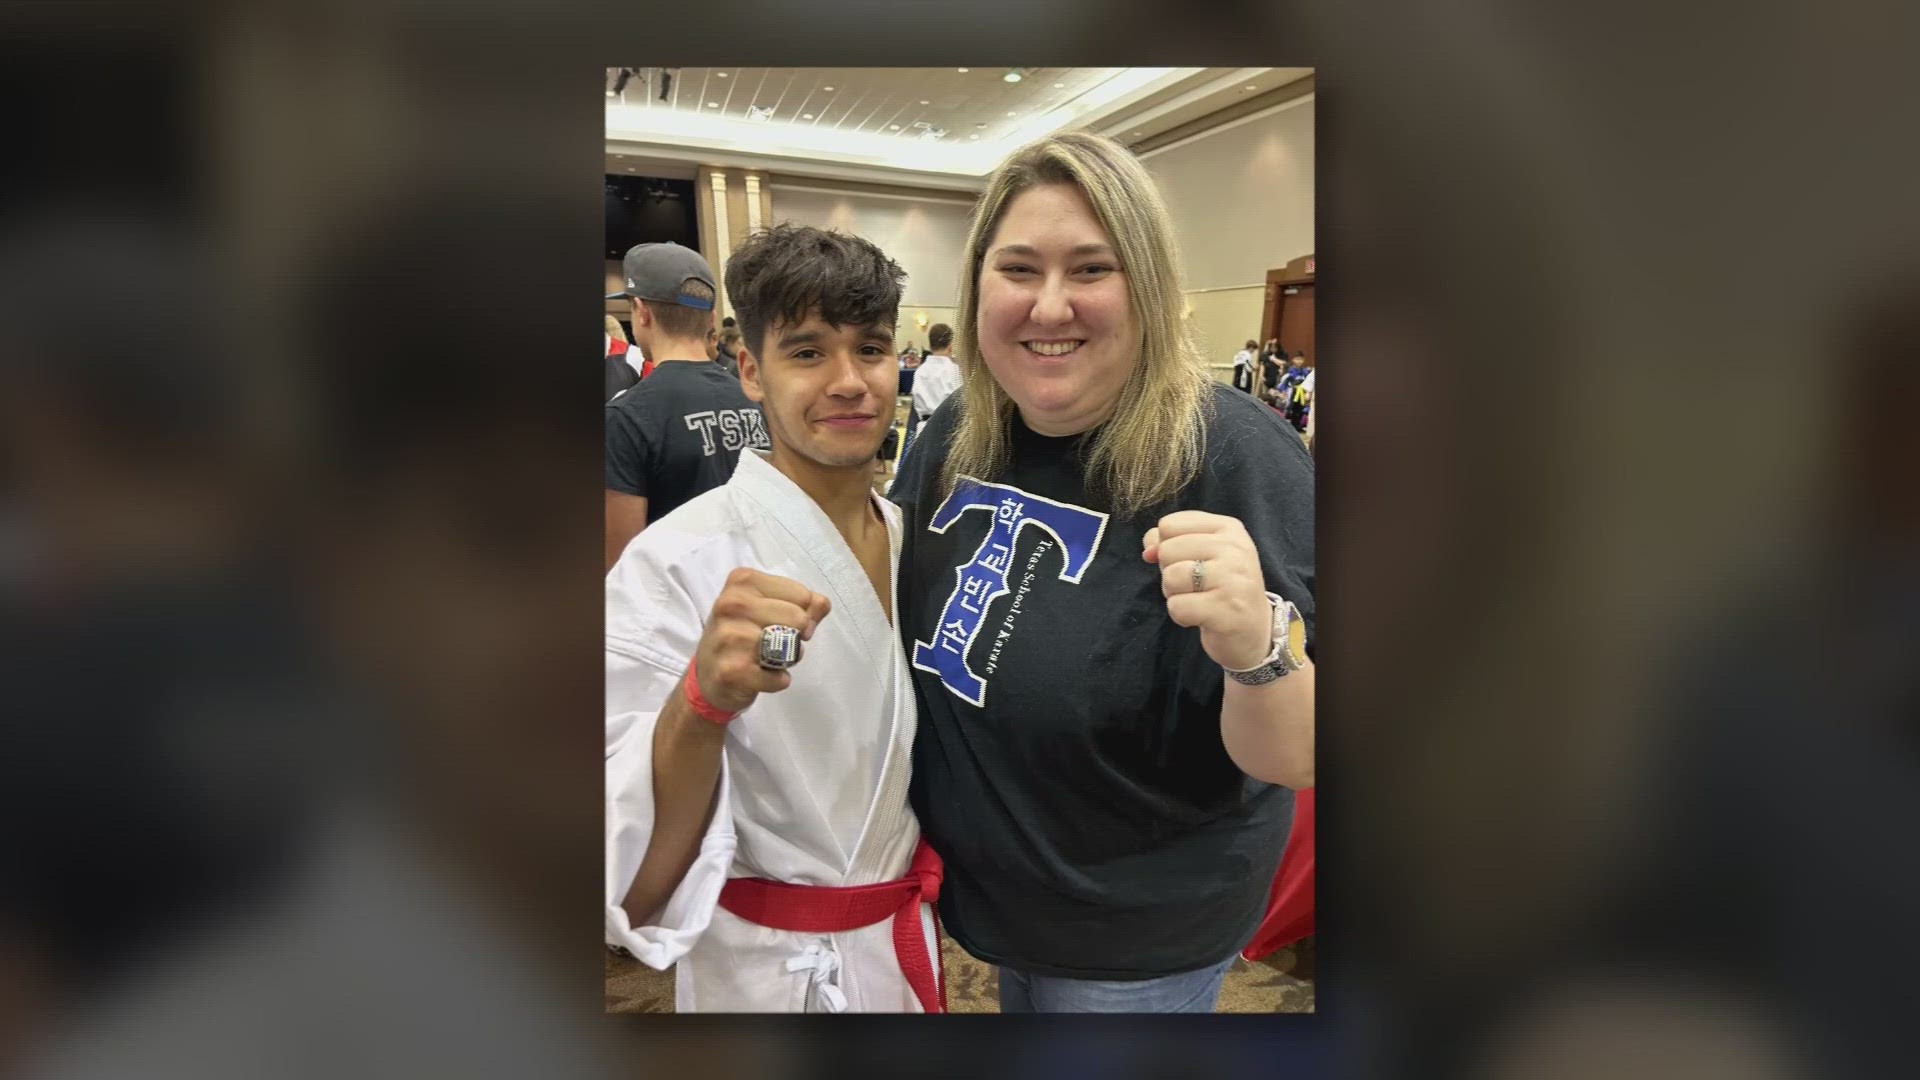 "Everybody is feeling the effects of Angel," said his karate teacher, Ashley Wood. "He touched everyone he came in contact with. You couldn't help but love him."